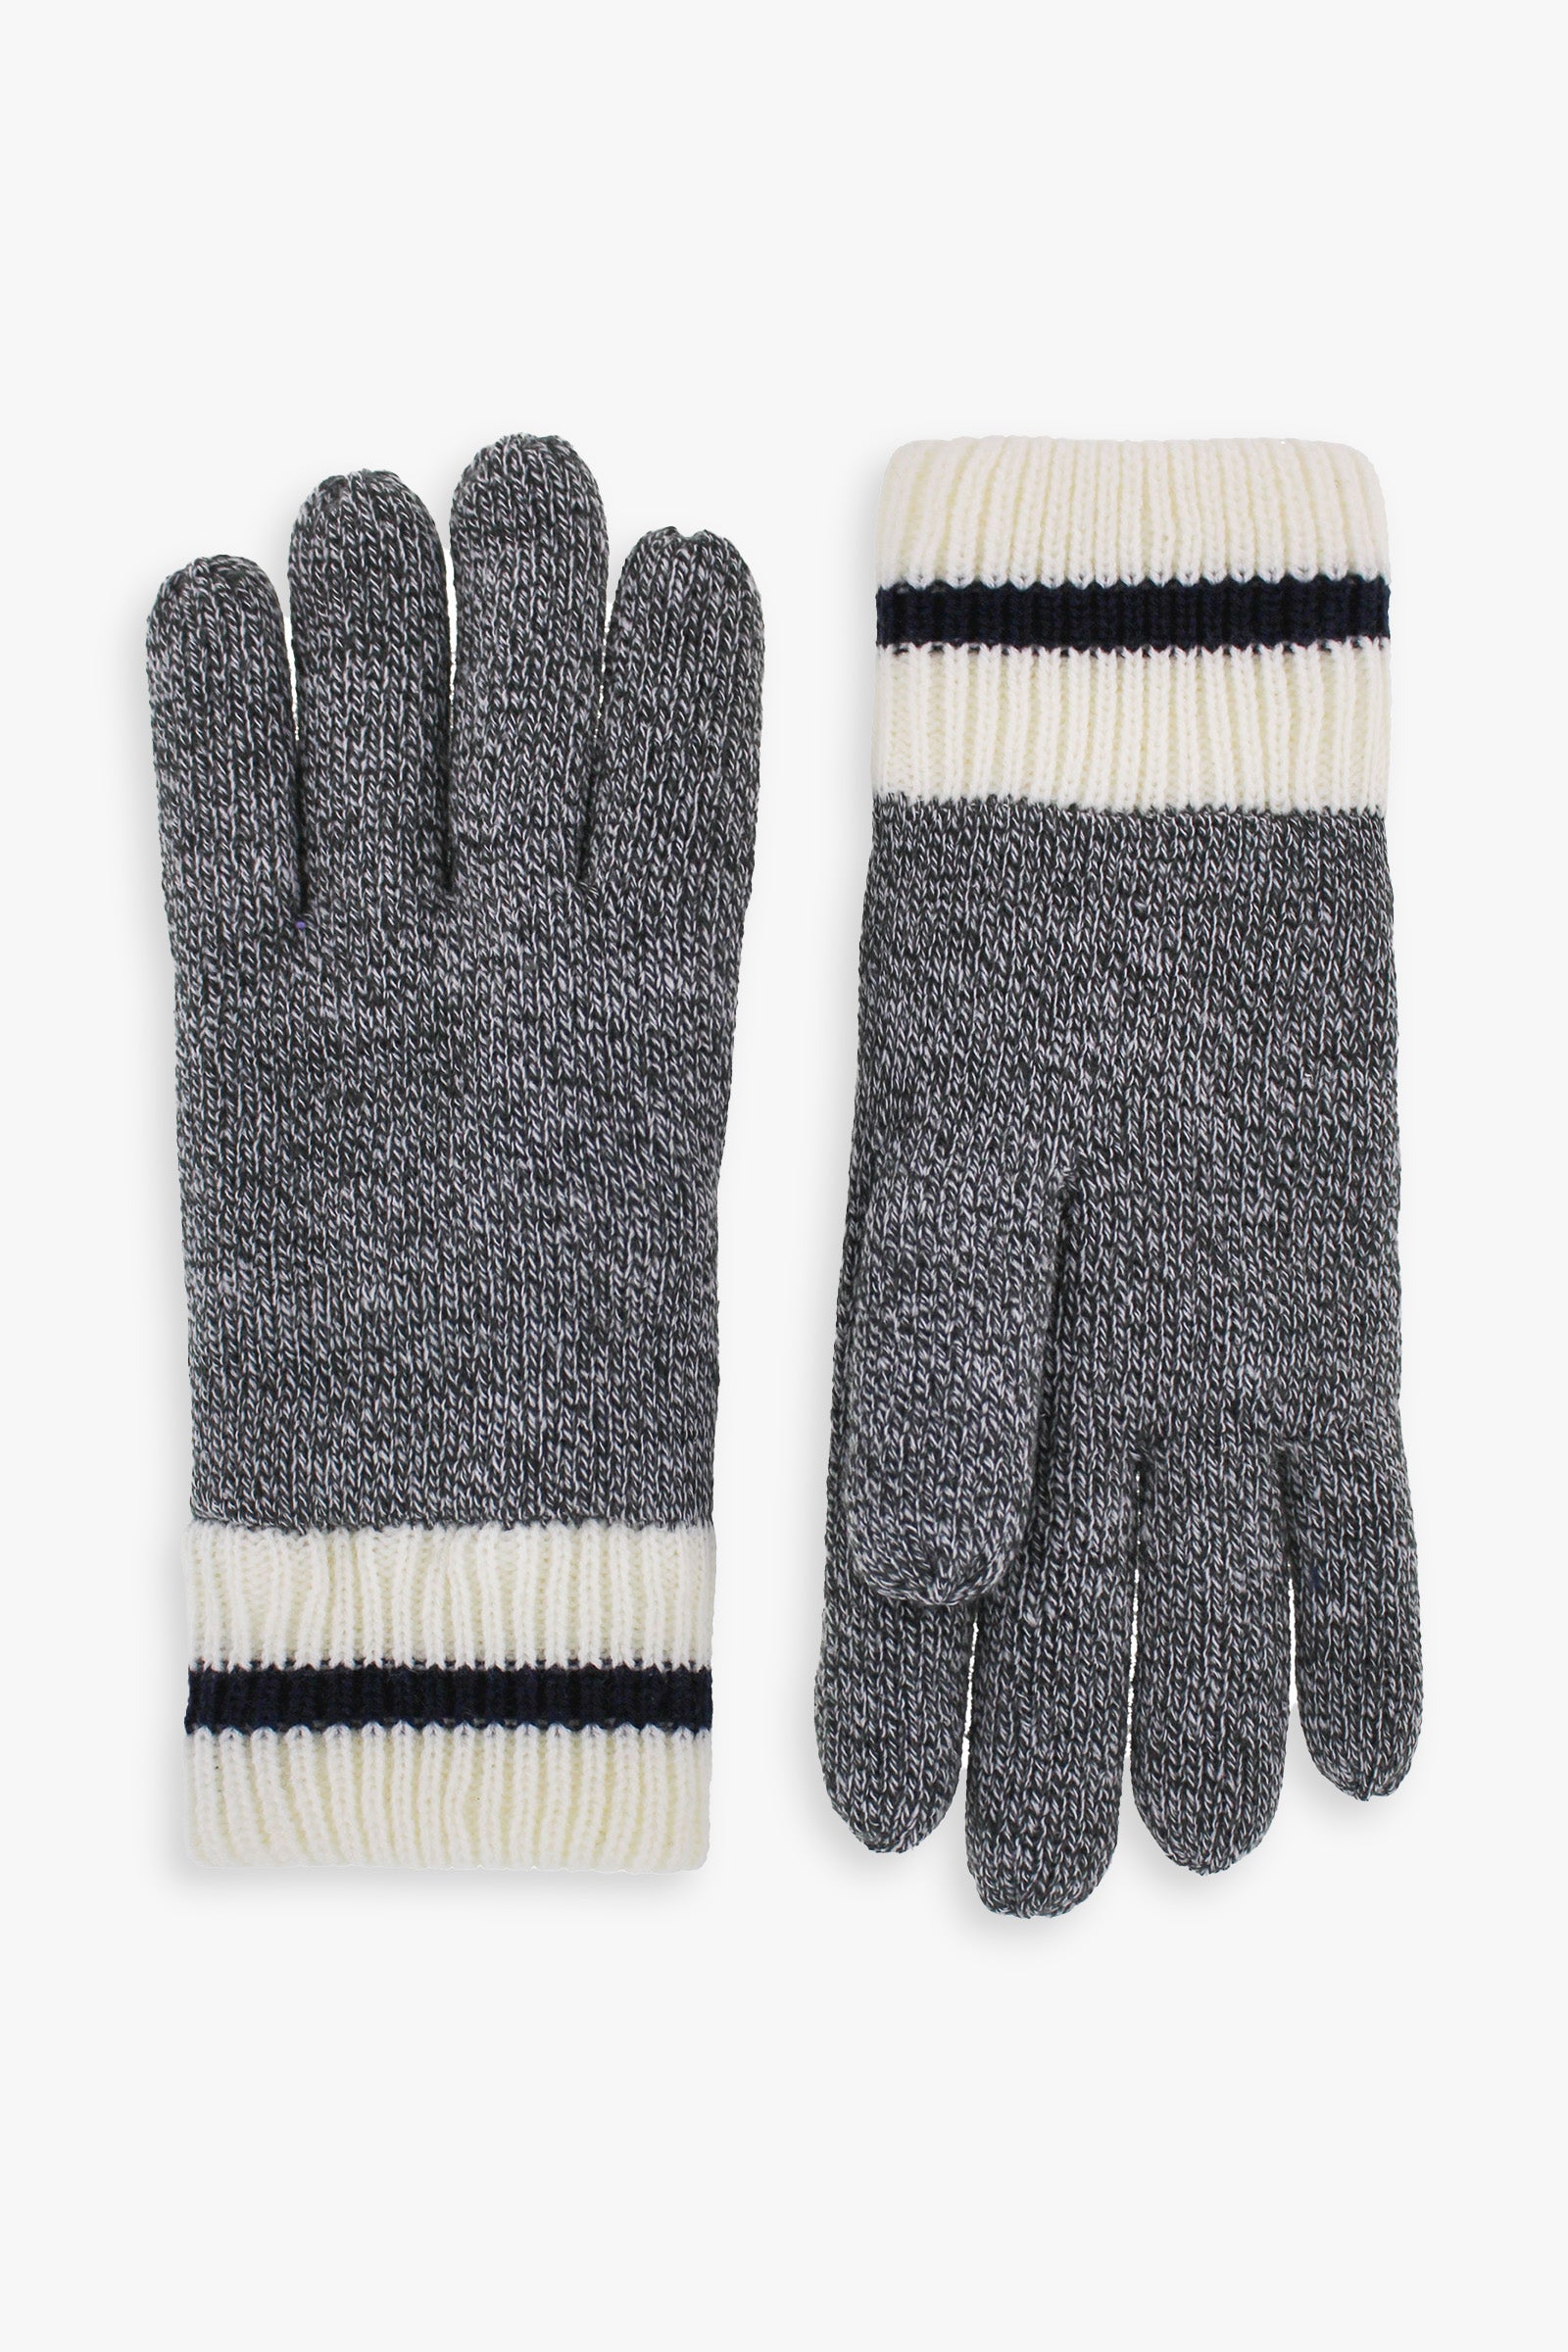 Men's Knit Glove With Touchscreen